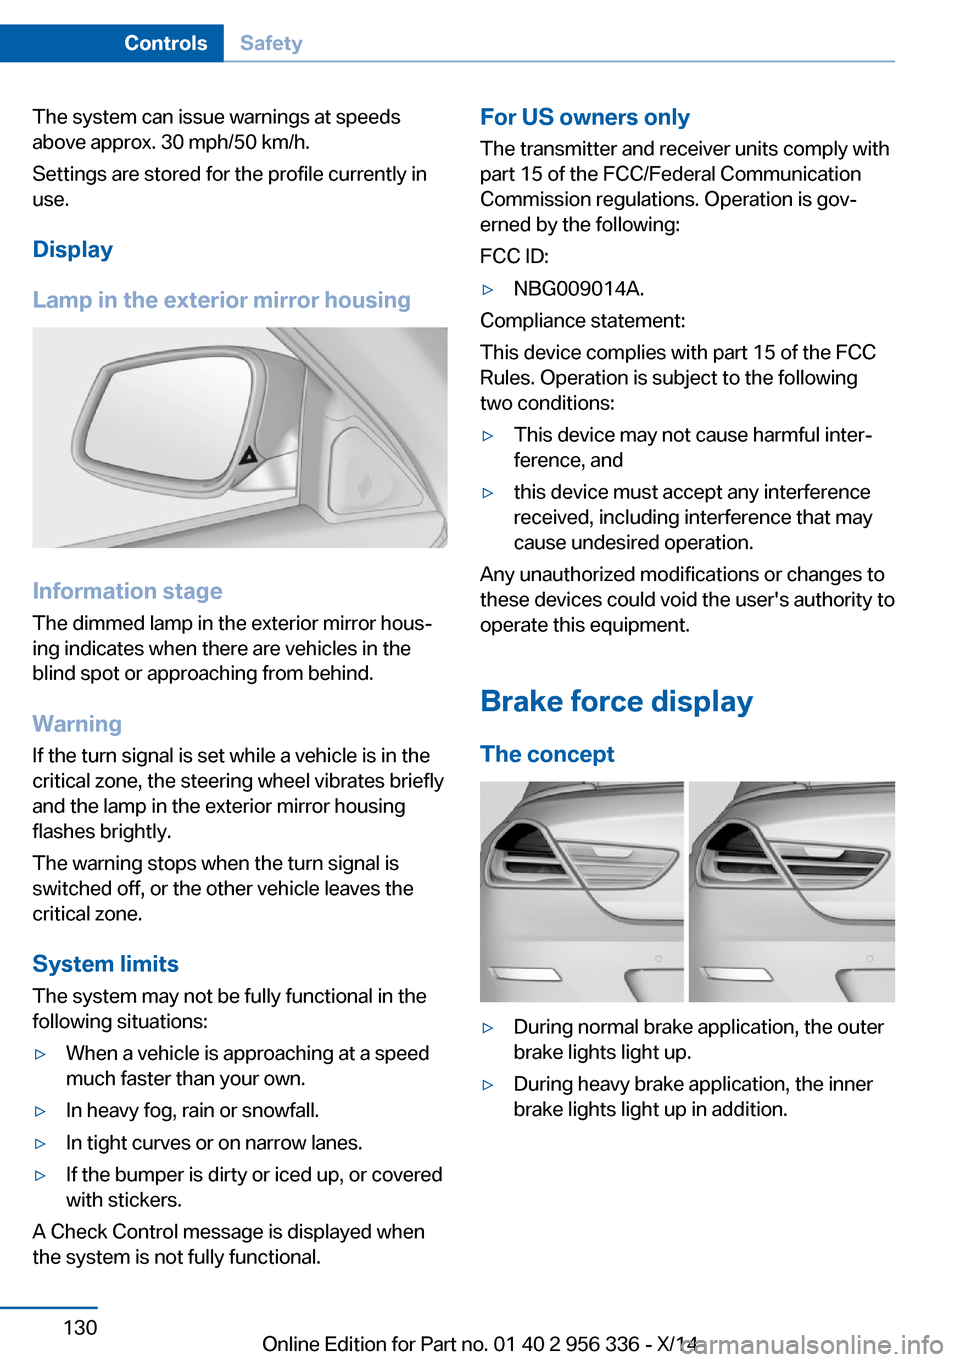 BMW 6 SERIES CONVERTIBLE 2014 F12 Owners Guide The system can issue warnings at speeds
above approx. 30 mph/50 km/h.
Settings are stored for the profile currently in
use.
Display
Lamp in the exterior mirror housing
Information stage
The dimmed lam